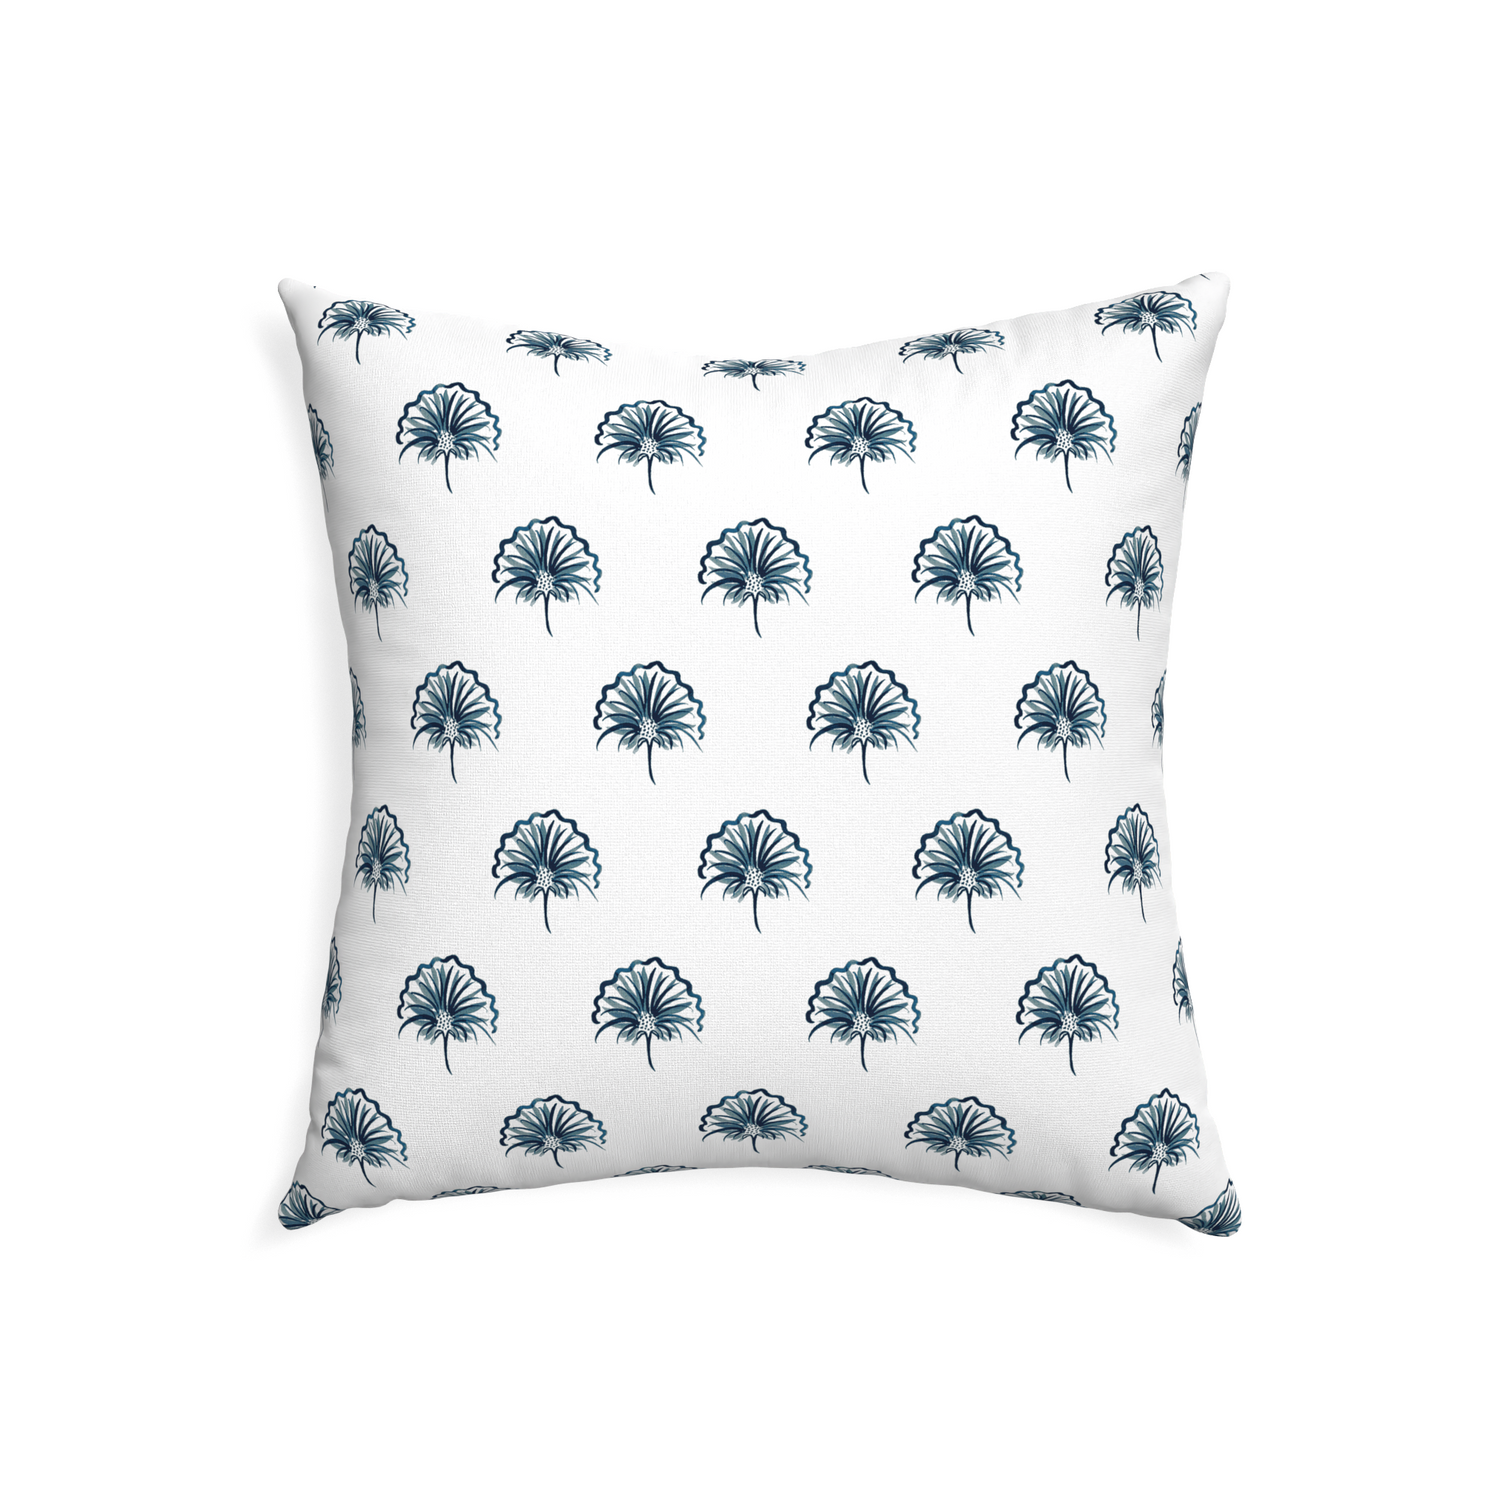 22-square penelope midnight custom floral navypillow with none on white background